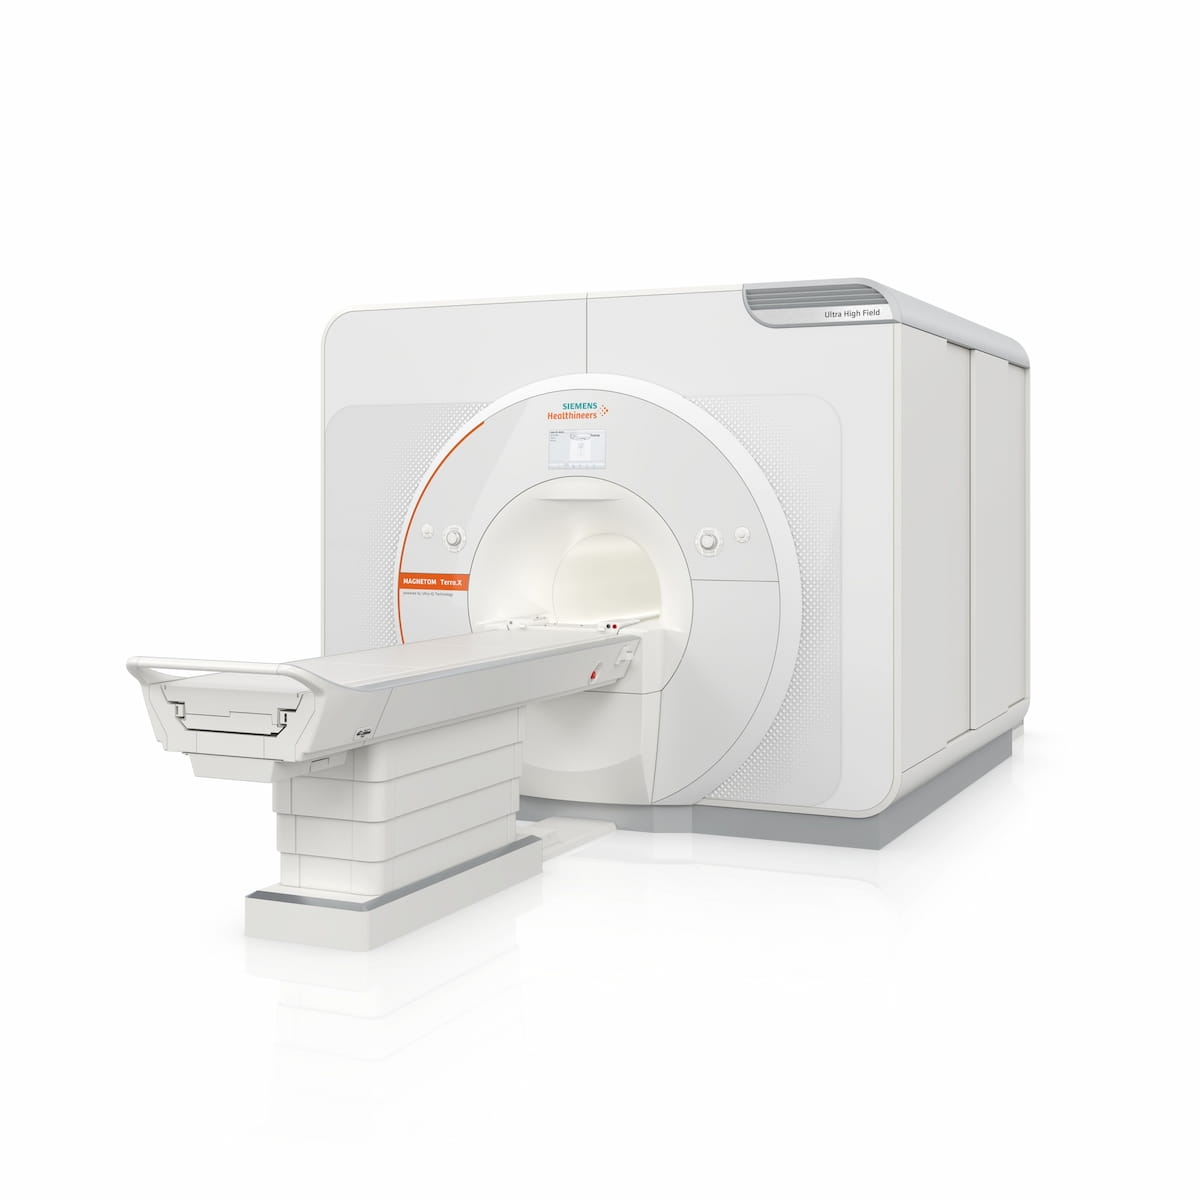 FDA Clears New 7T MRI System from Siemens Healthineers